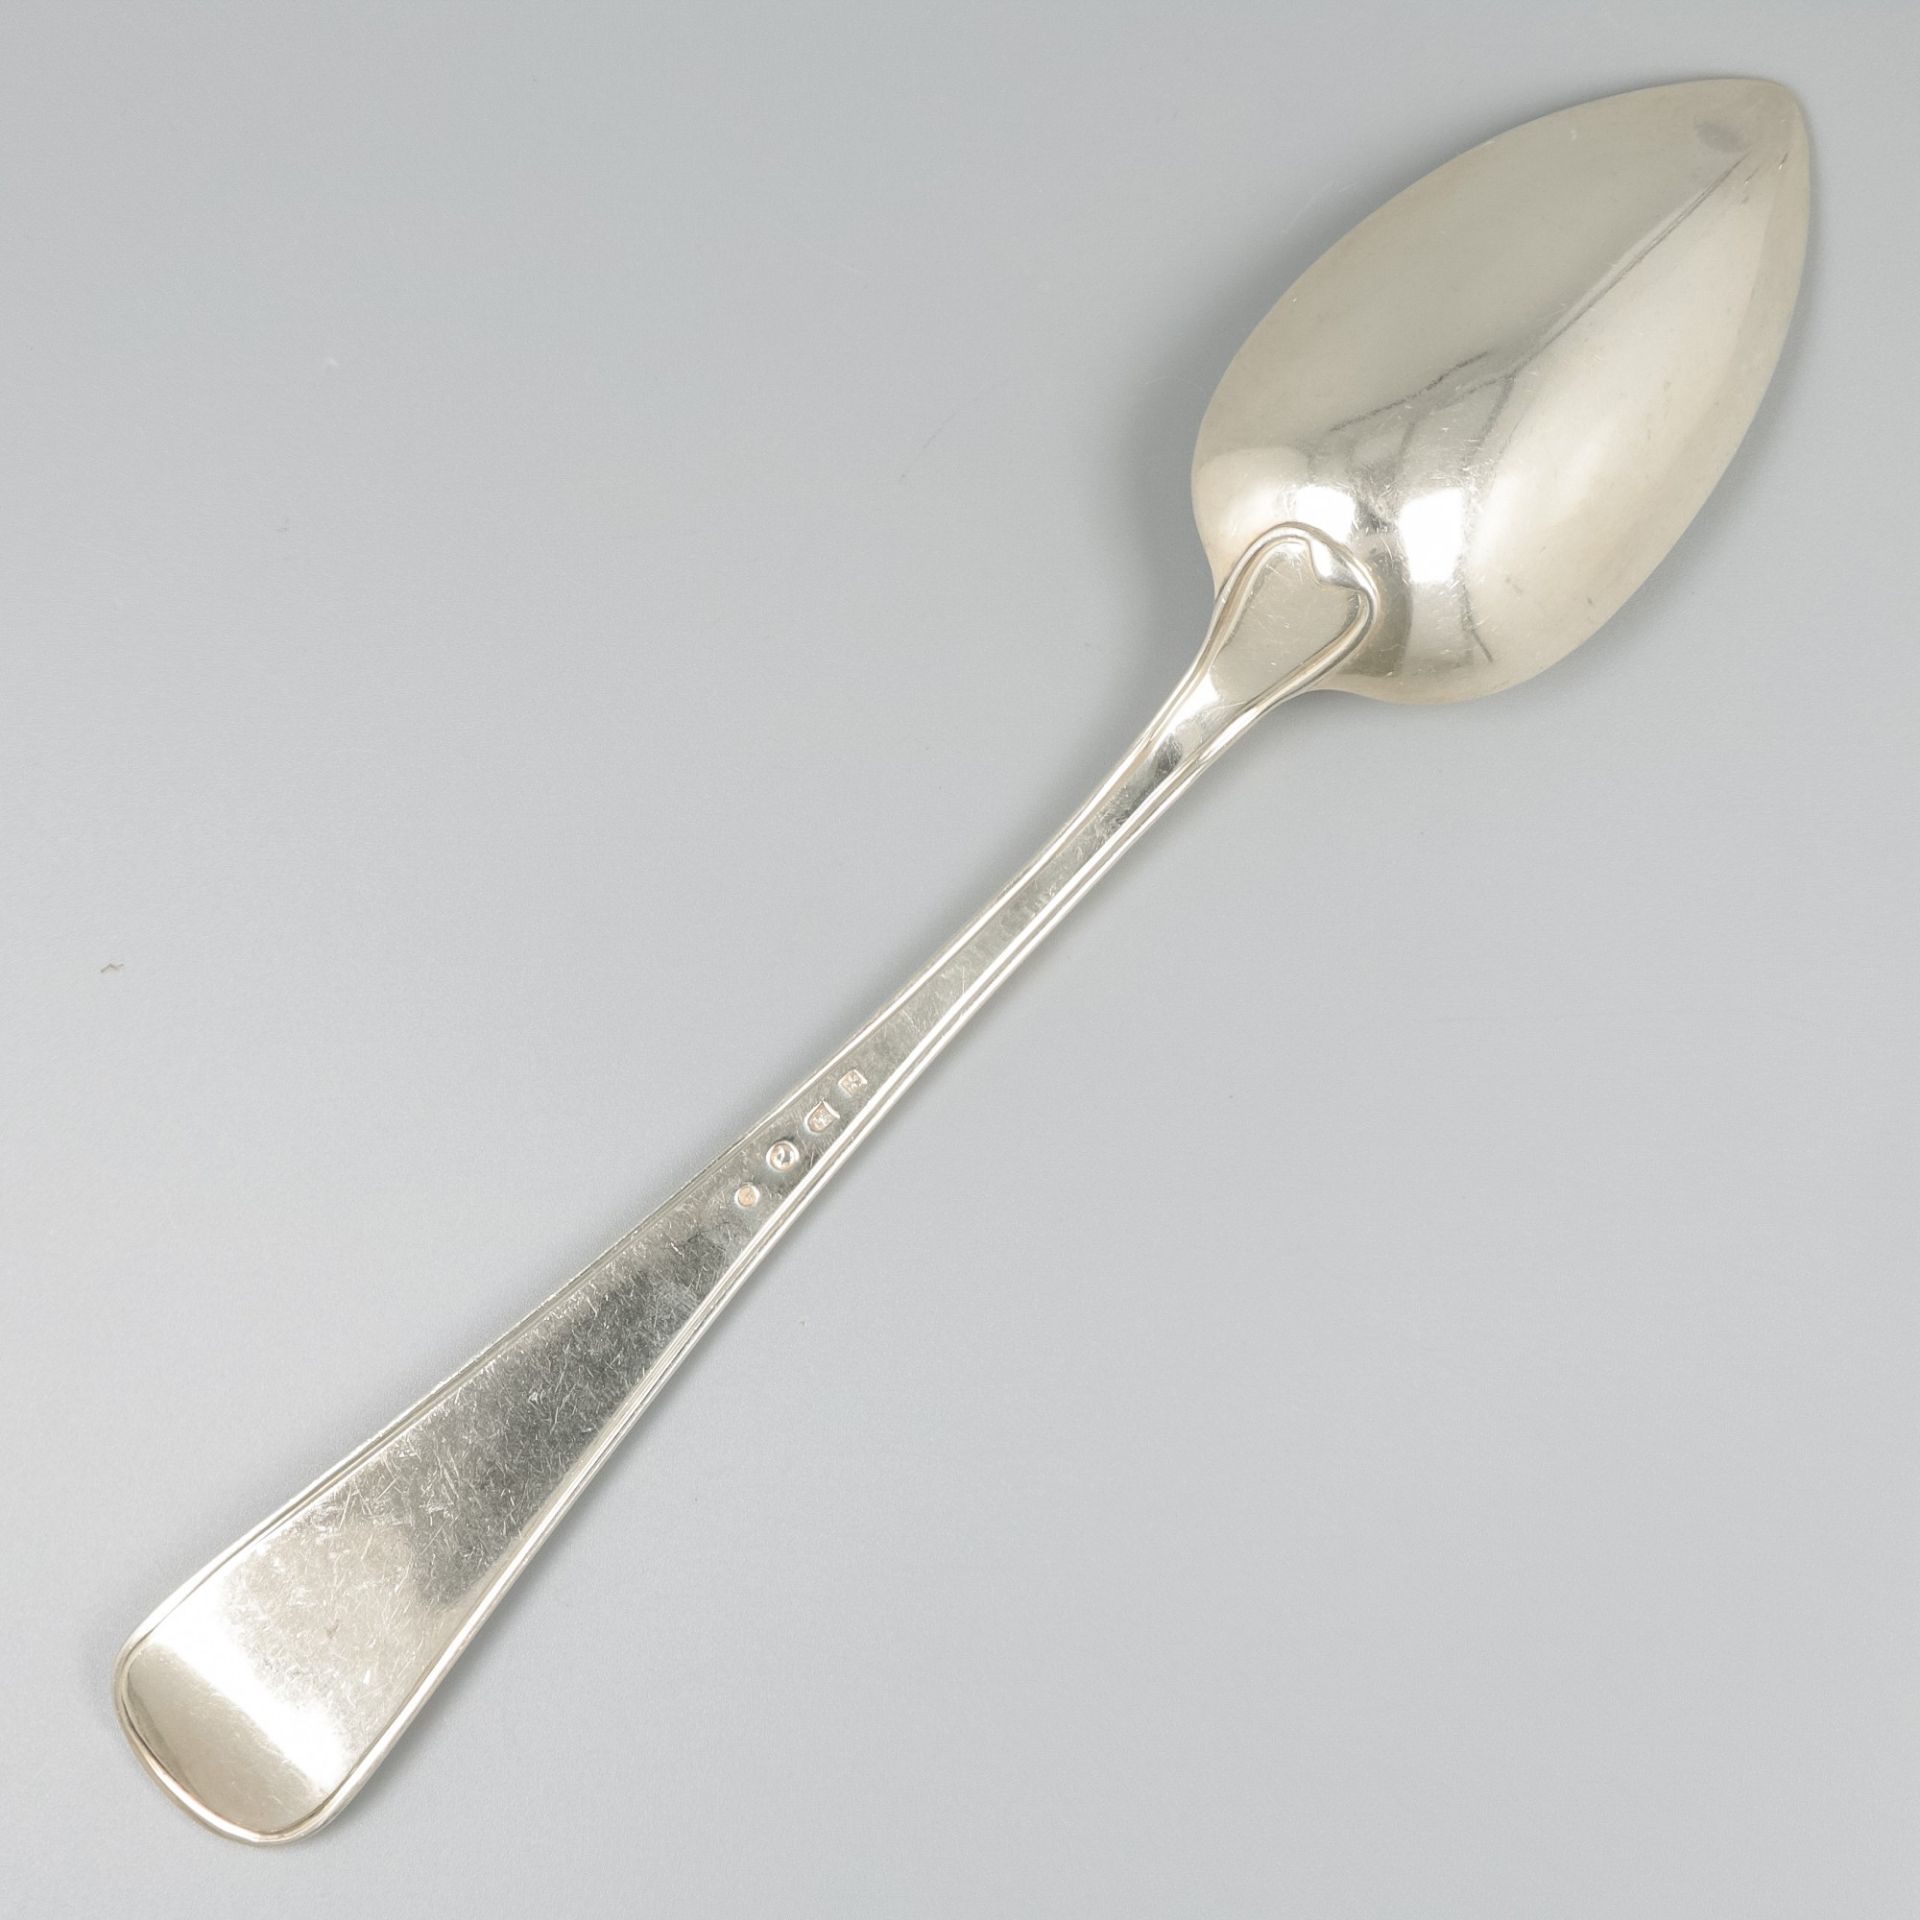 Vegetable serving spoon "Hollands Rondfilet",  silver. - Image 2 of 6